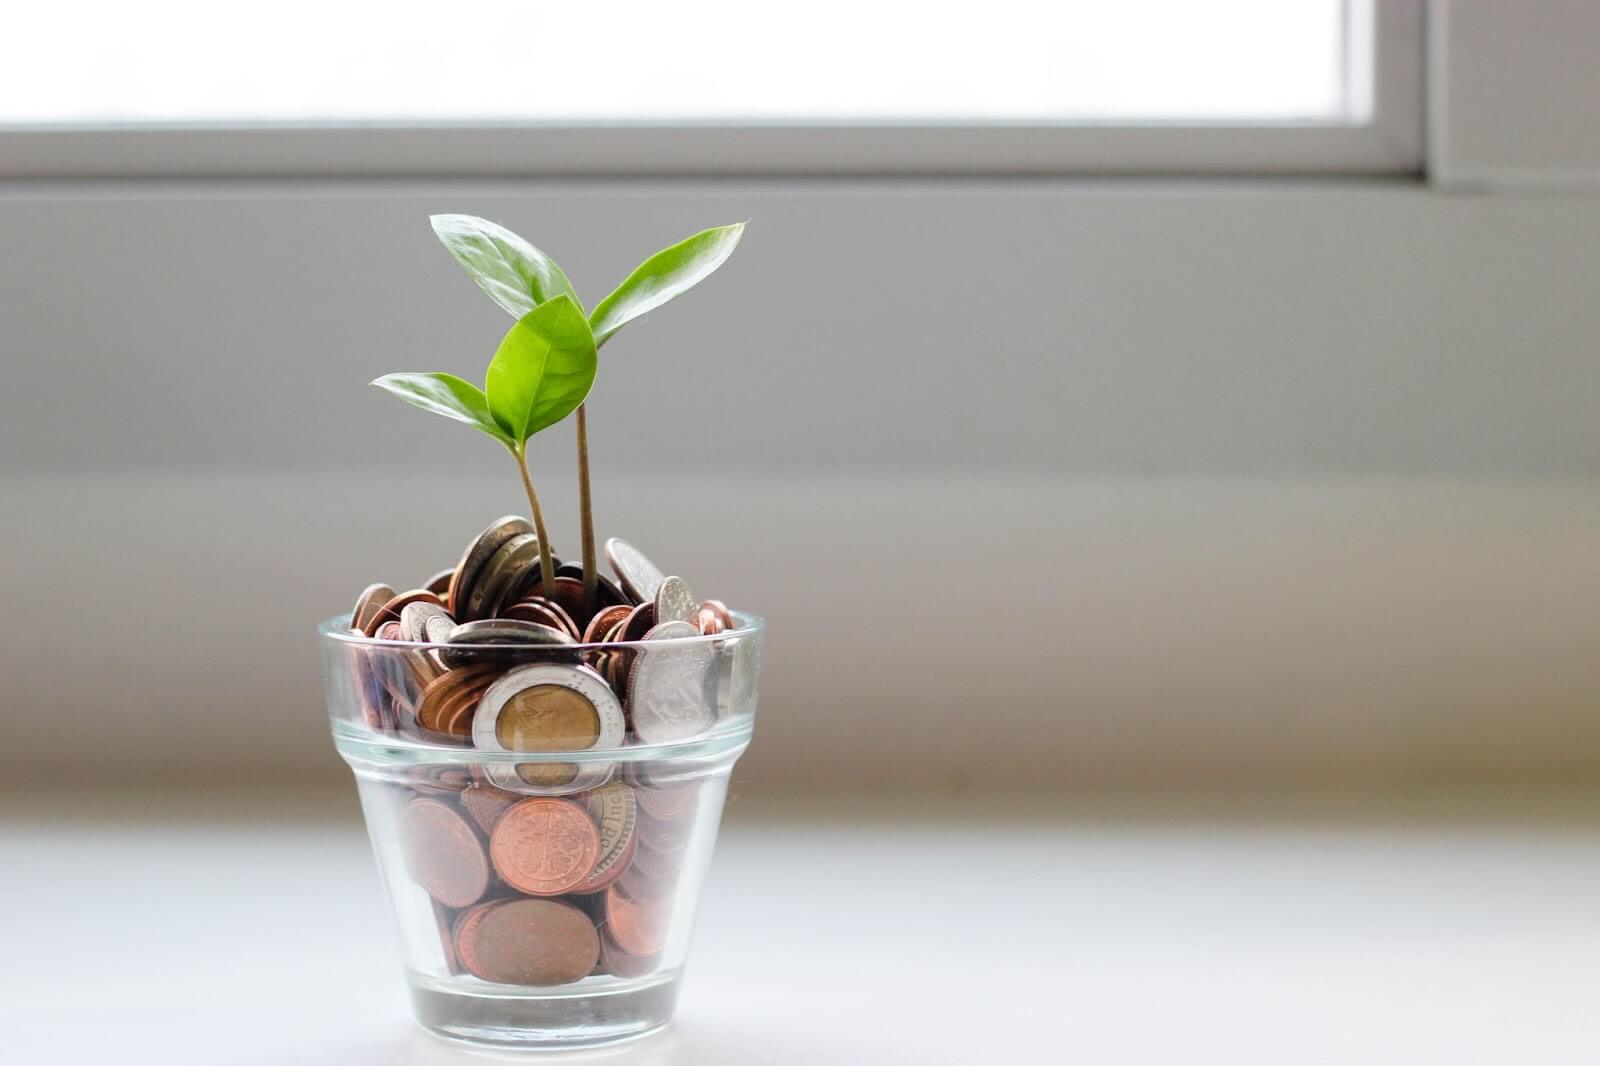 A glass full of coins and a green plant